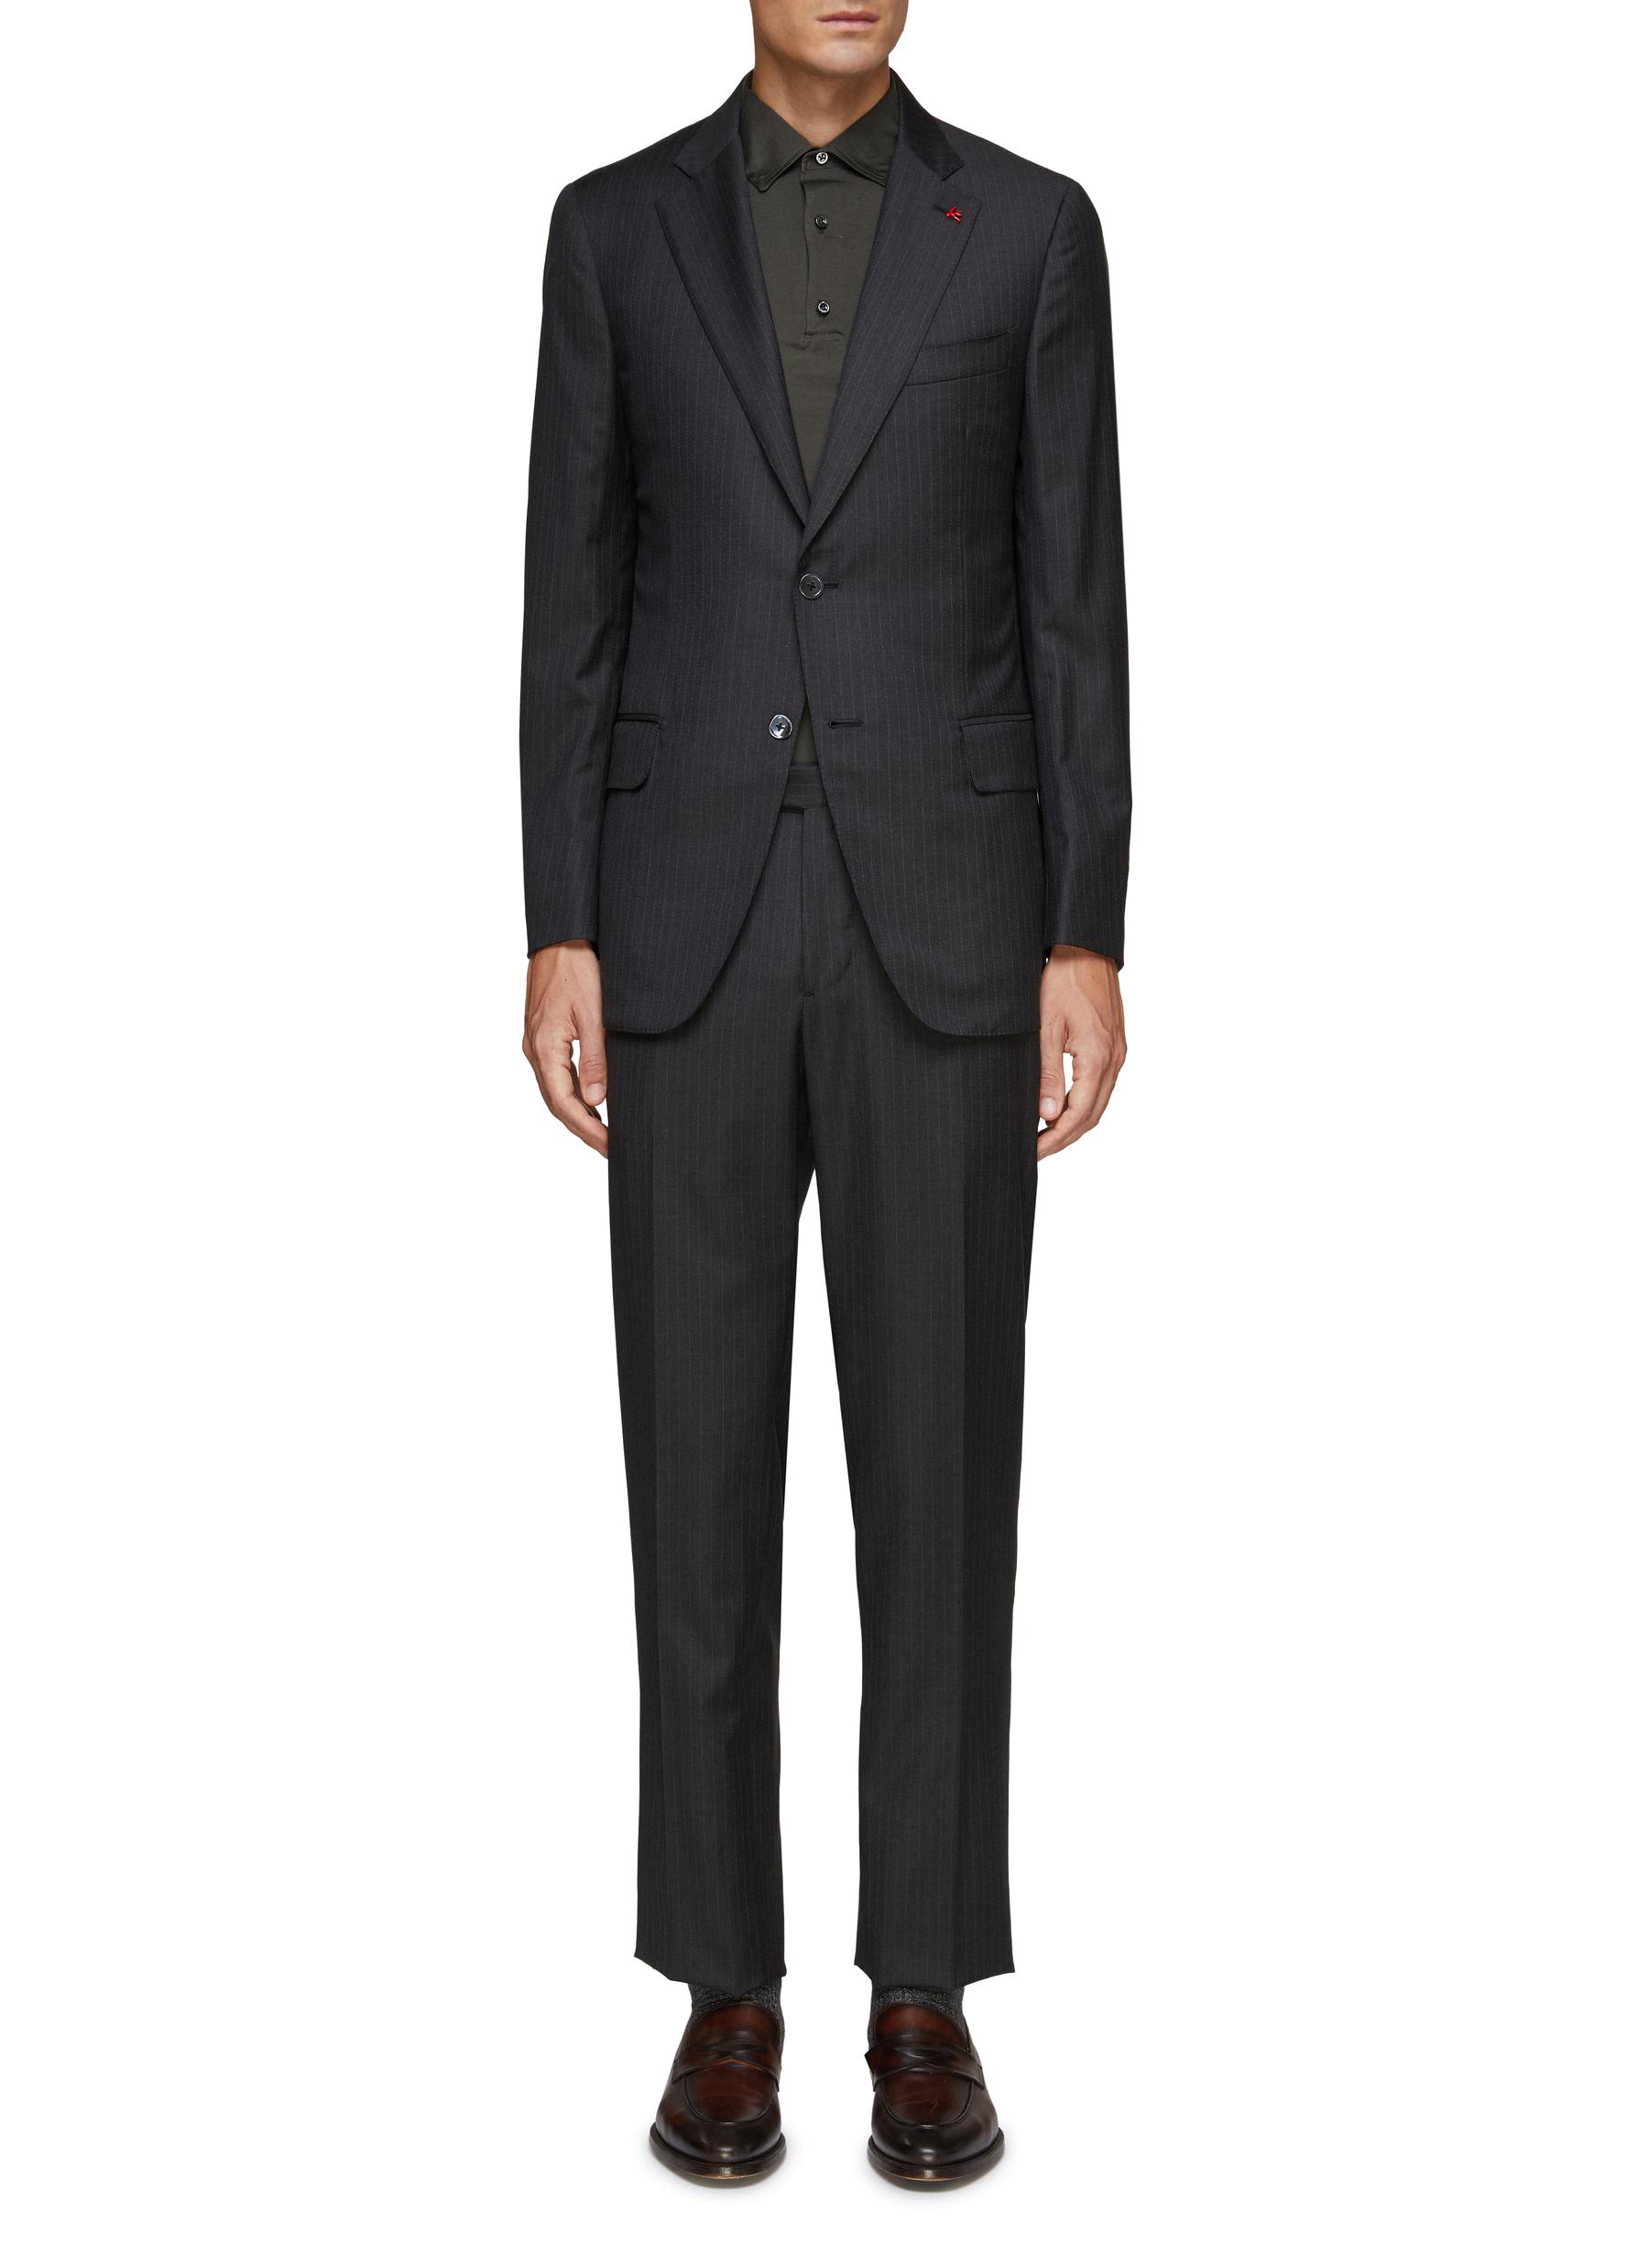 ISAIA 'GREGORIO' SINGLE BREASTED NOTCH LAPEL HALF LINED WOOL SUIT